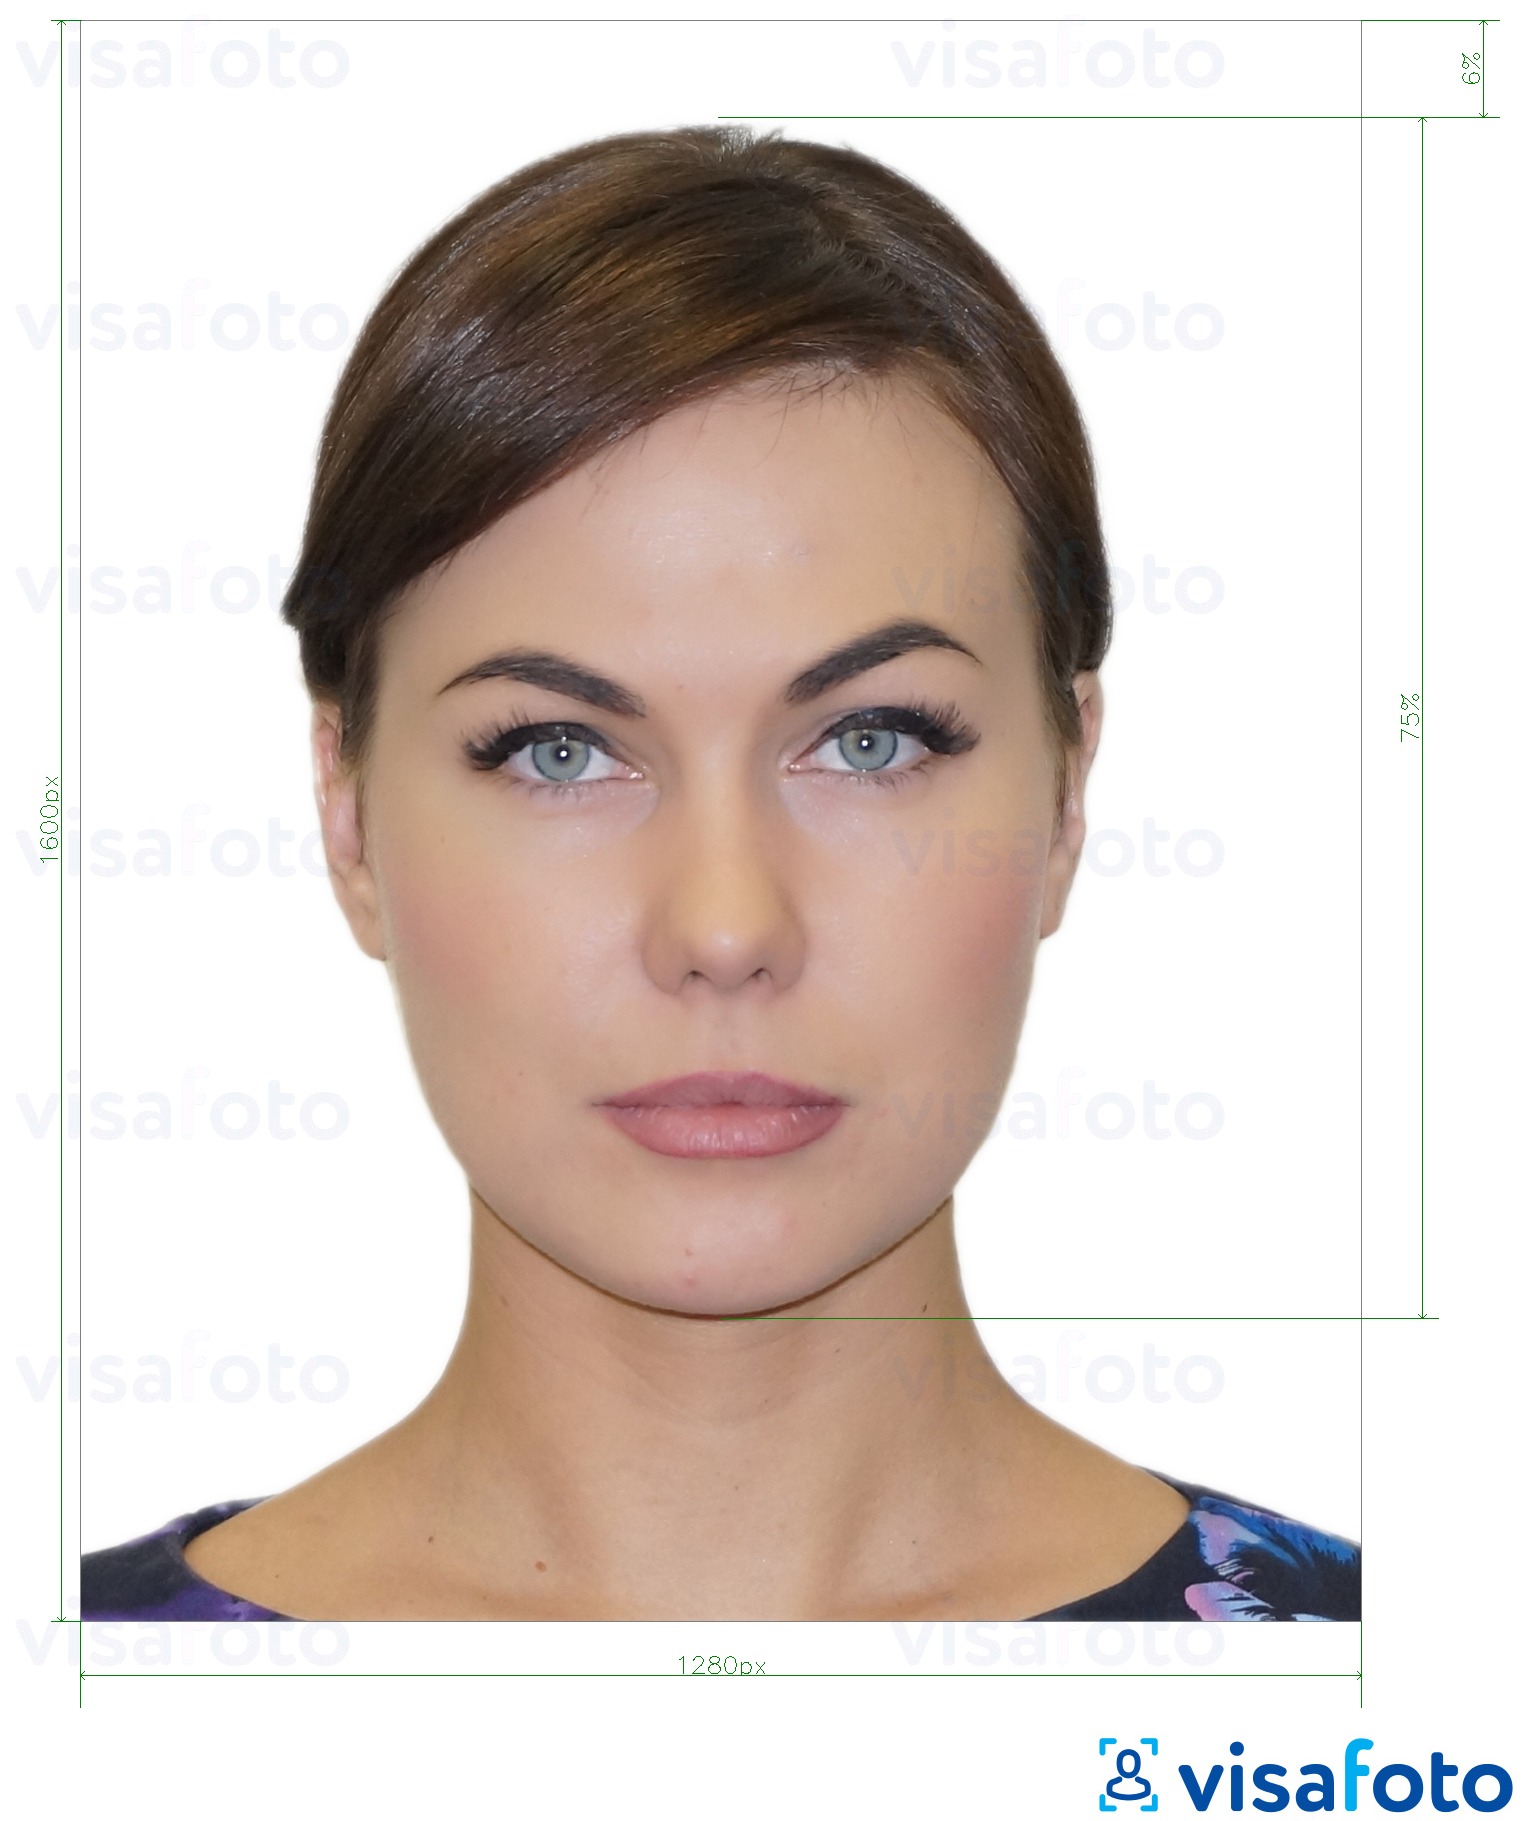 Example of photo for Greece driving license 800x1200 pixels with exact size specification